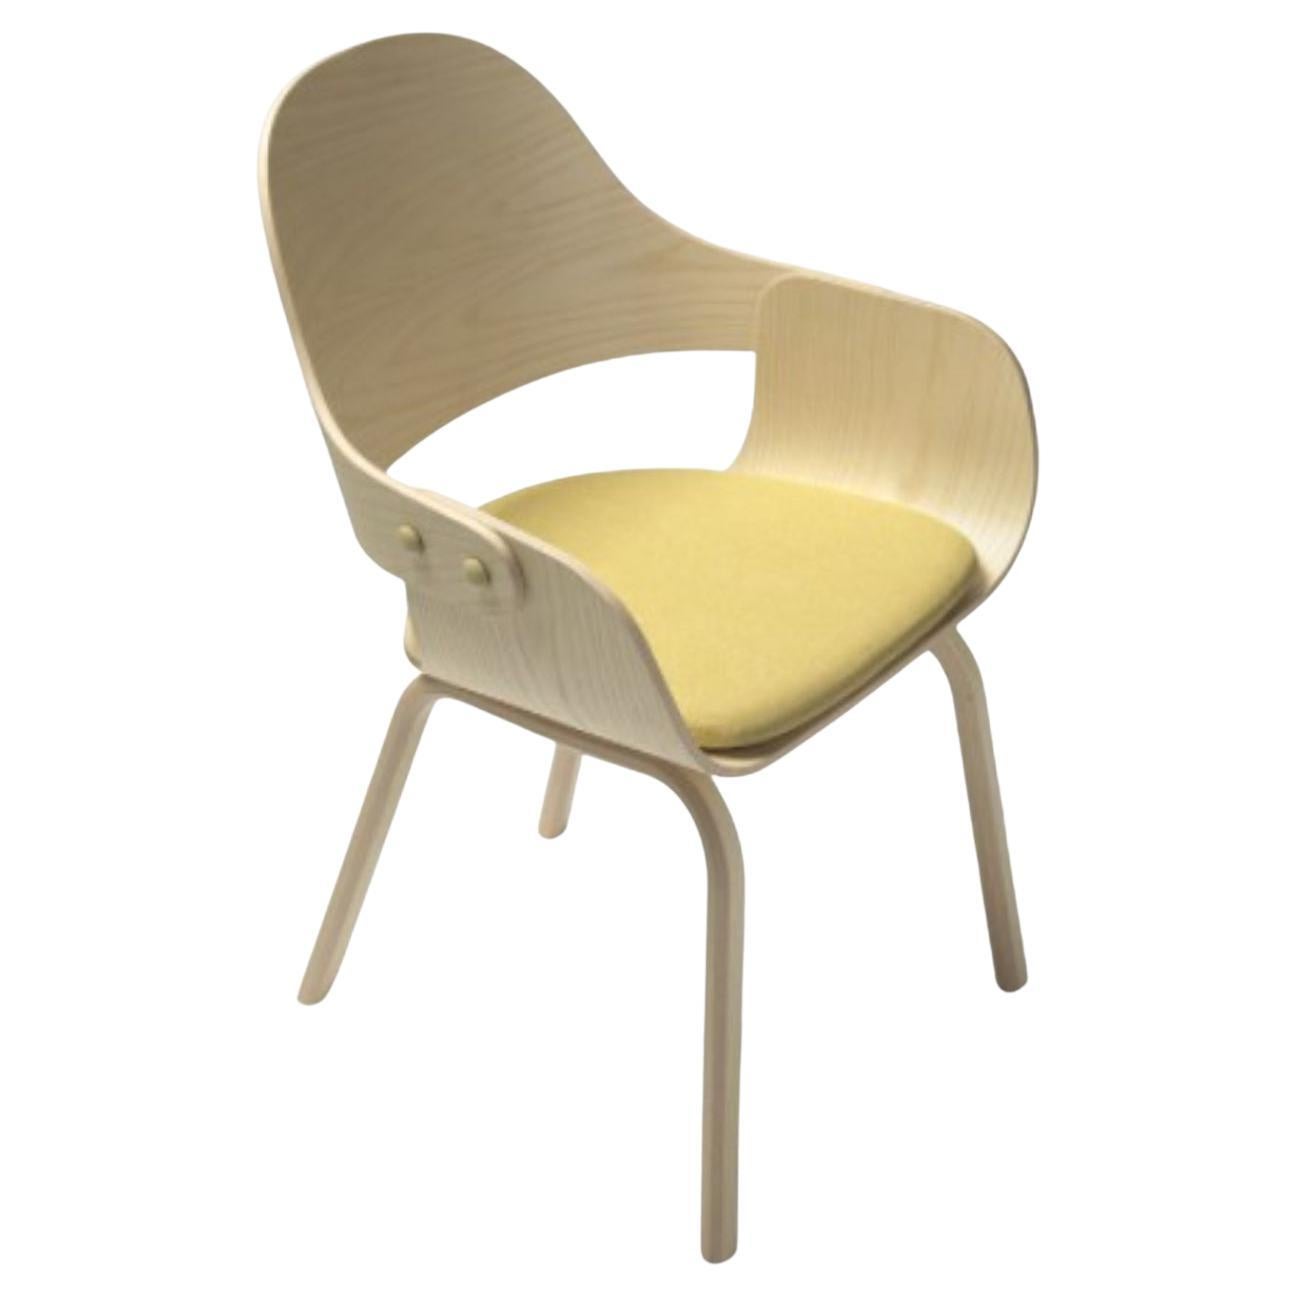 Wooden Legs Showtime Nude Beige Chair by Jaime Hayon